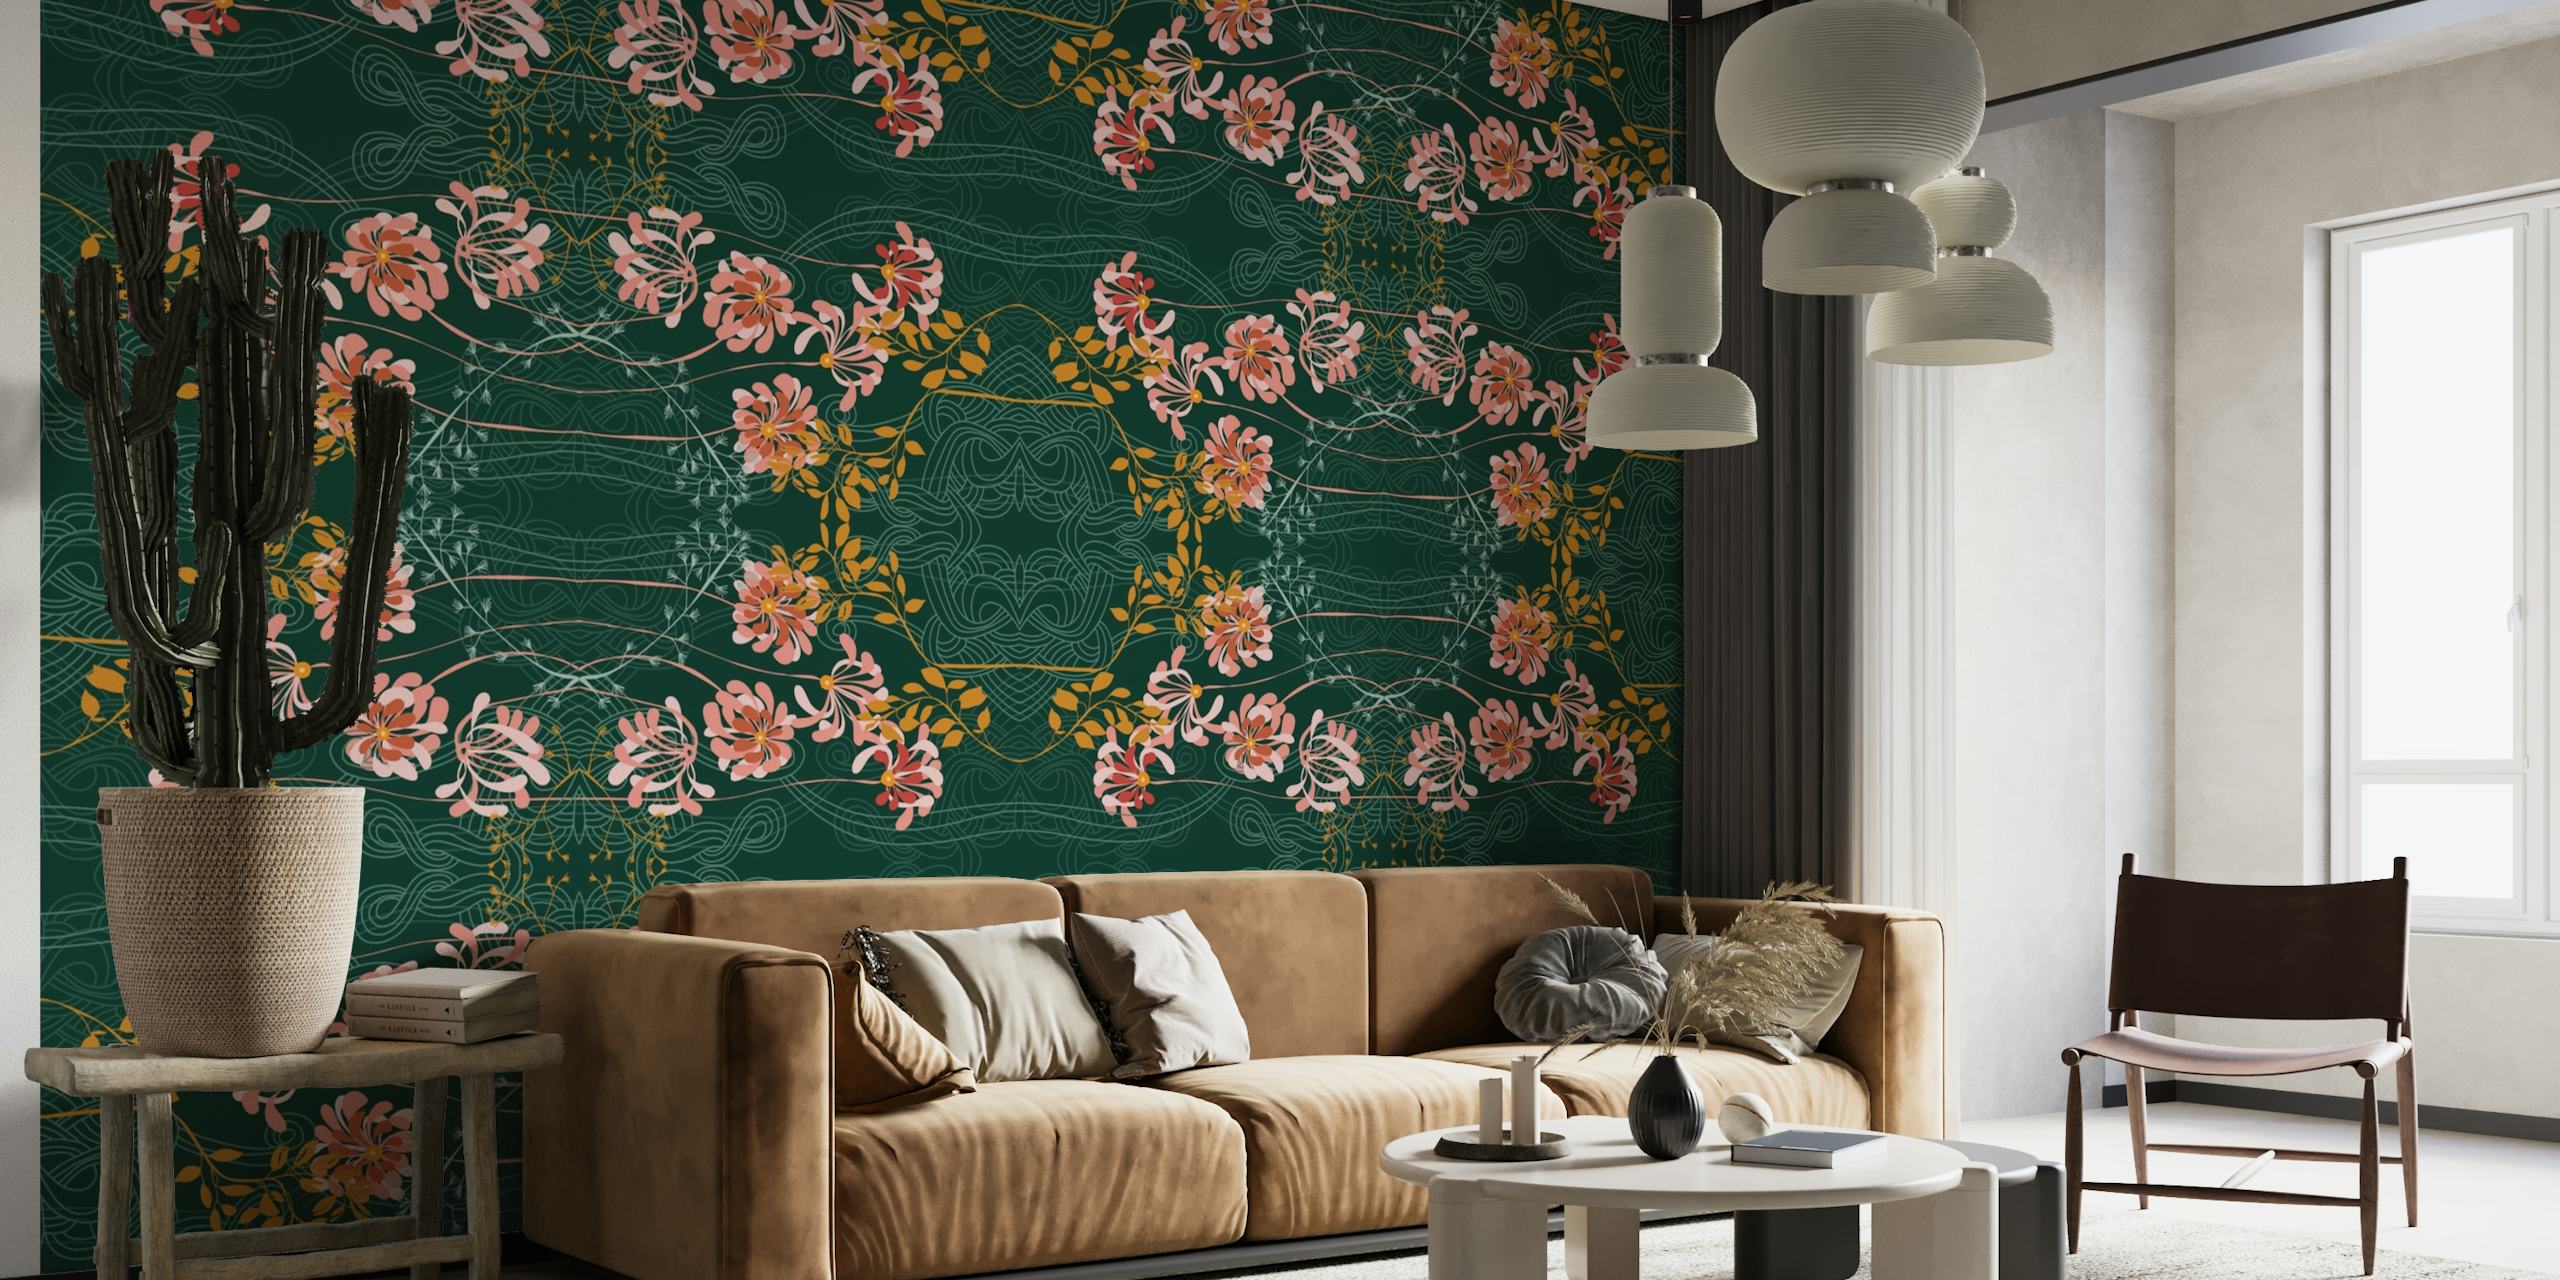 Art Nouveau style wall mural with green background and pink floral design with gold accents